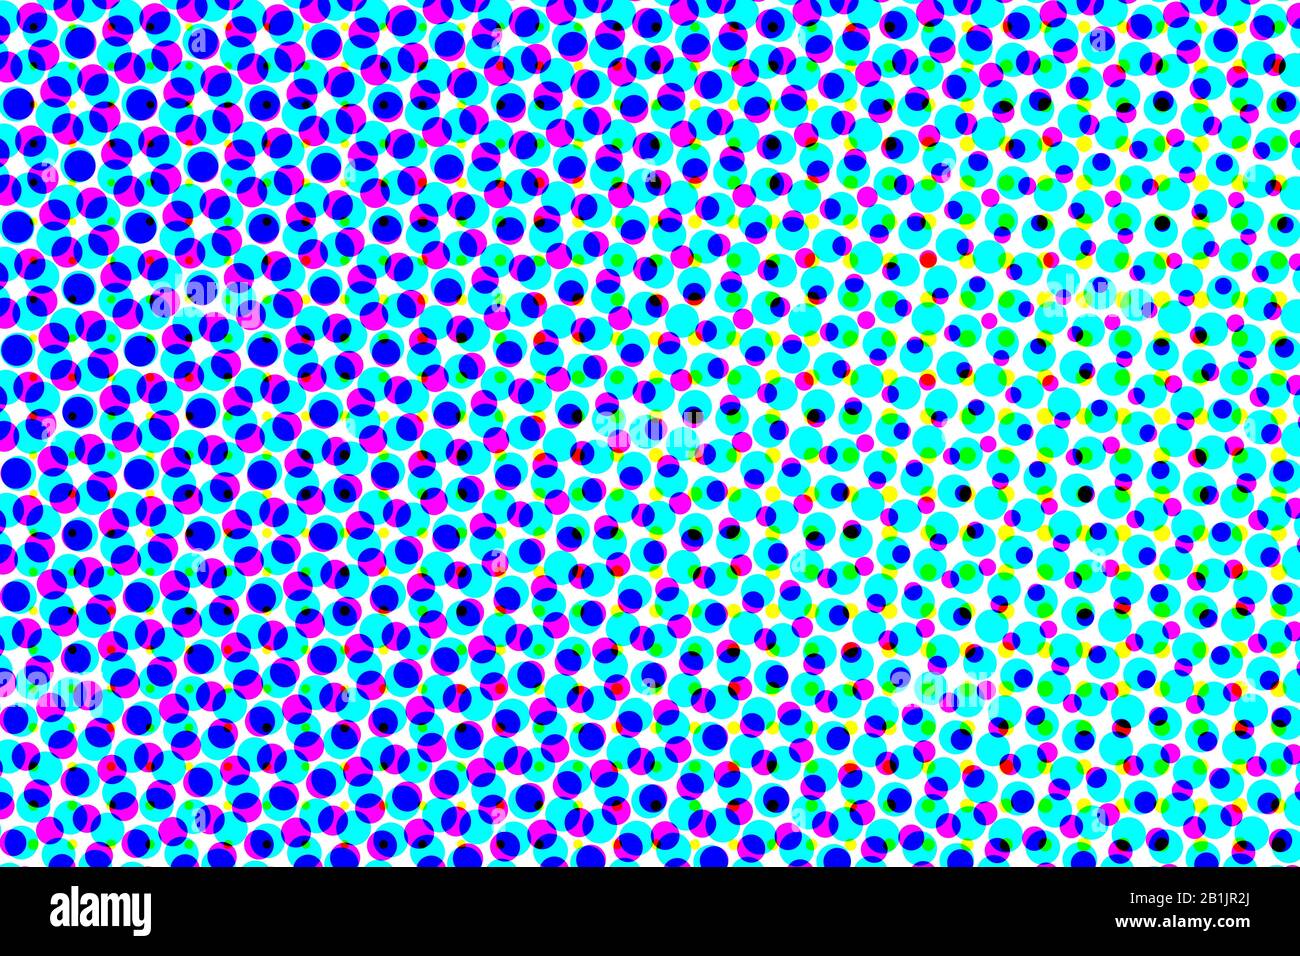 blue and purple halftone pattern. colorful halftone background and texture. illustration. Stock Photo